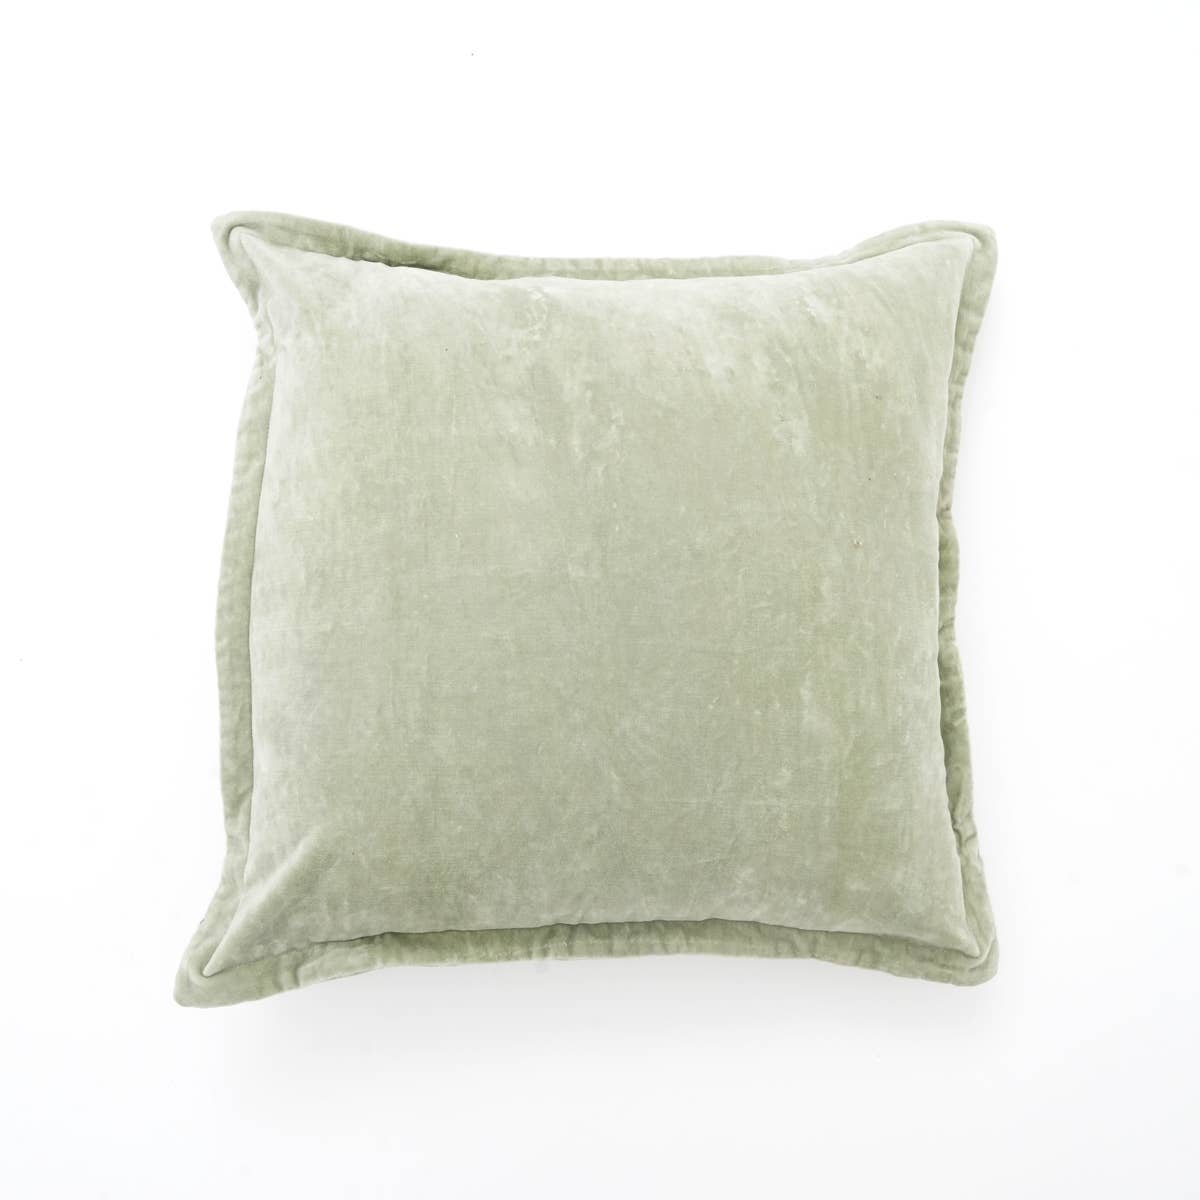 Cotton-Velvet-Solid-Cushion-with-Flanges-(Lavender)-Pillows